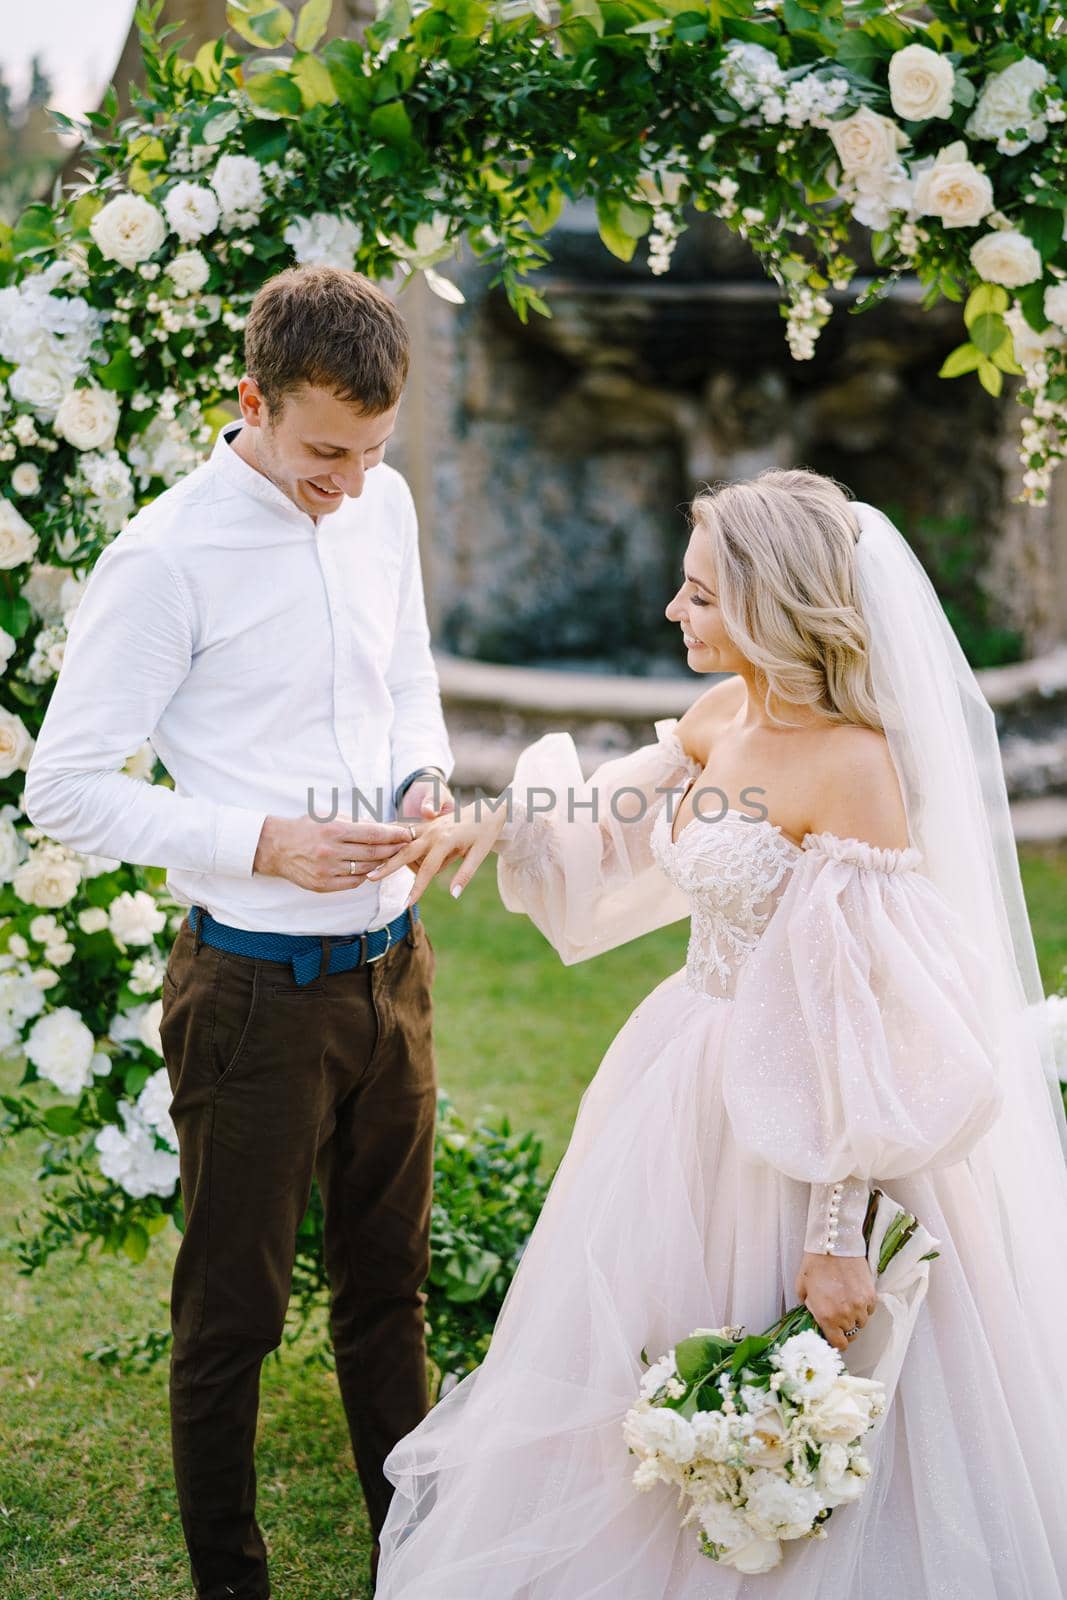 The groom puts the ring on the brides finger. Wedding at an old winery villa in Tuscany, Italy. Round wedding arch decorated with white flowers and greenery in front of an ancient Italian architecture by Nadtochiy